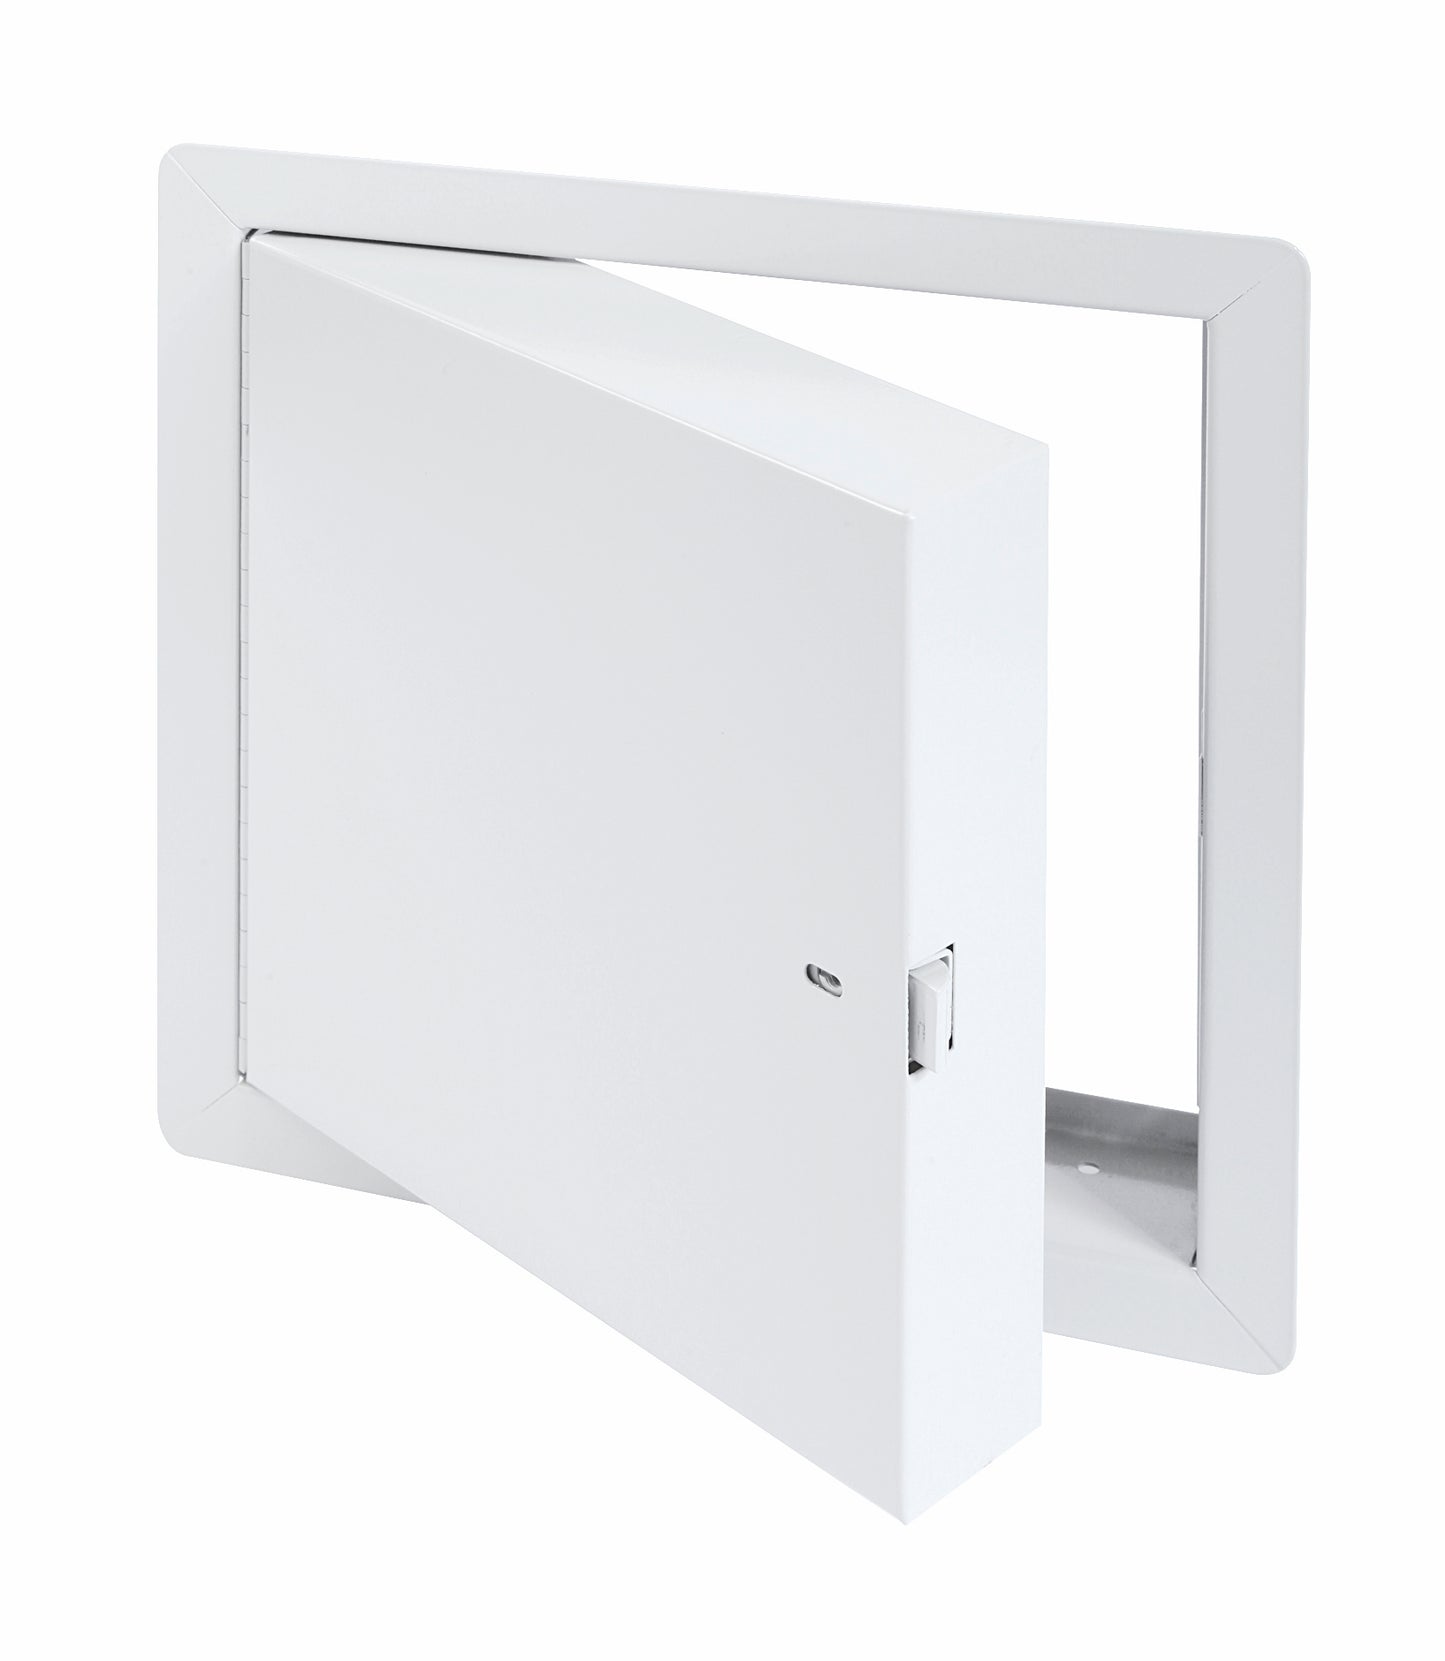 22"x36" Fire-rated Insulated Access Door with Exposed Flange, Cendrex